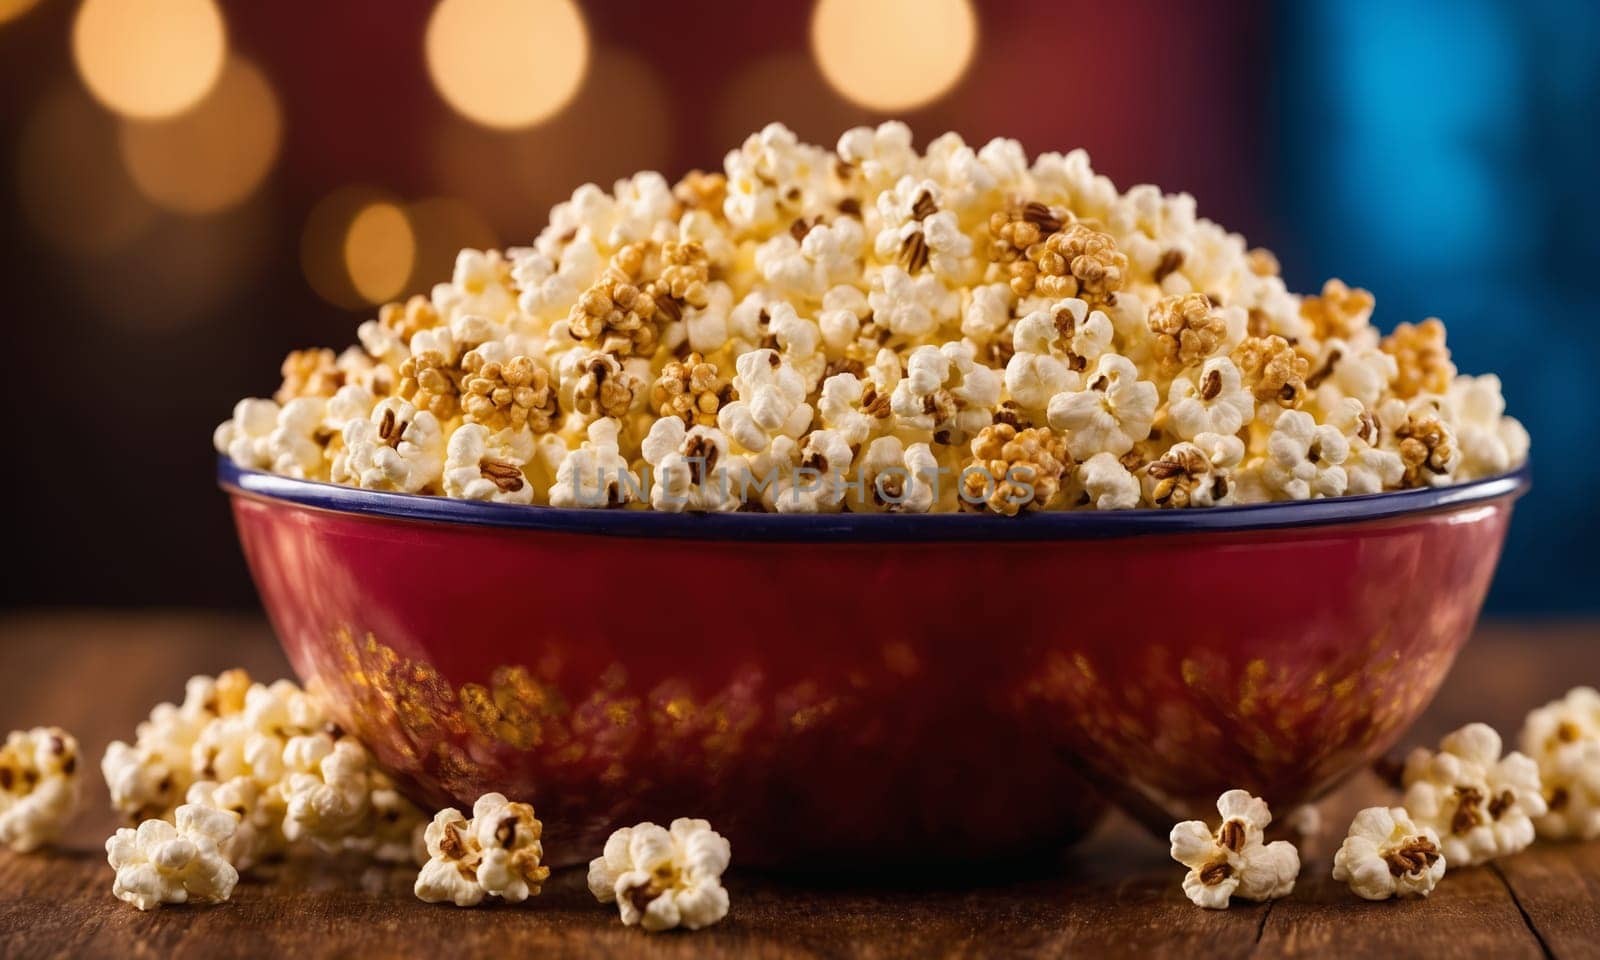 A bowl of kettle corn popcorn, a staple food and superfood, is placed on a wooden table, showcasing its delicious and crunchy texture